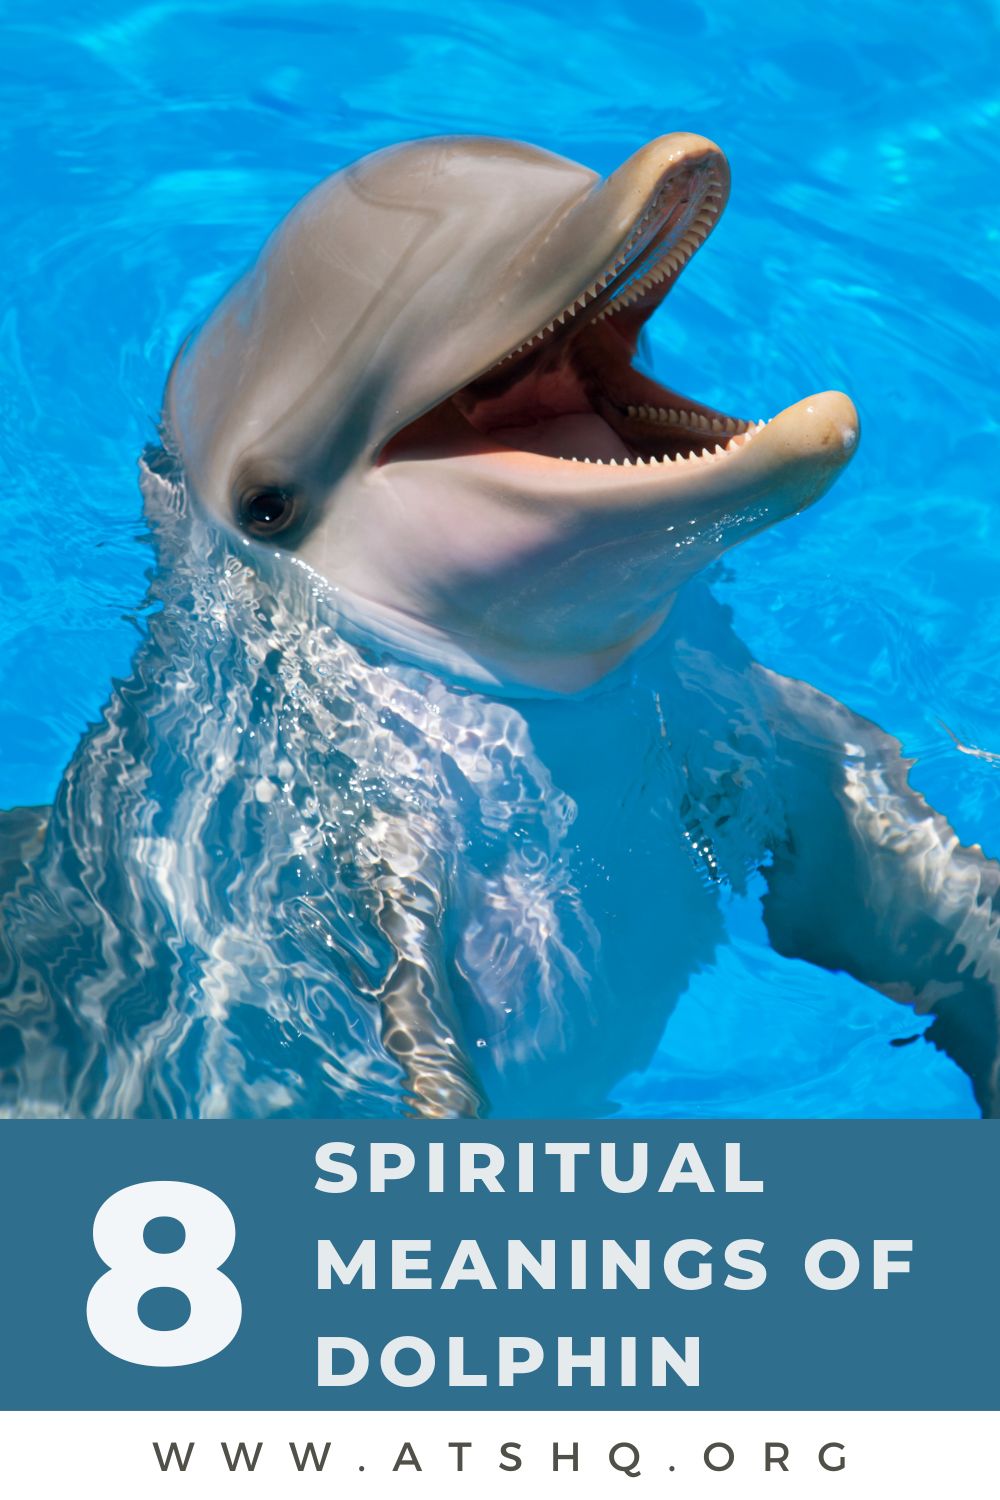 8 Spiritual Meanings of Dolphin